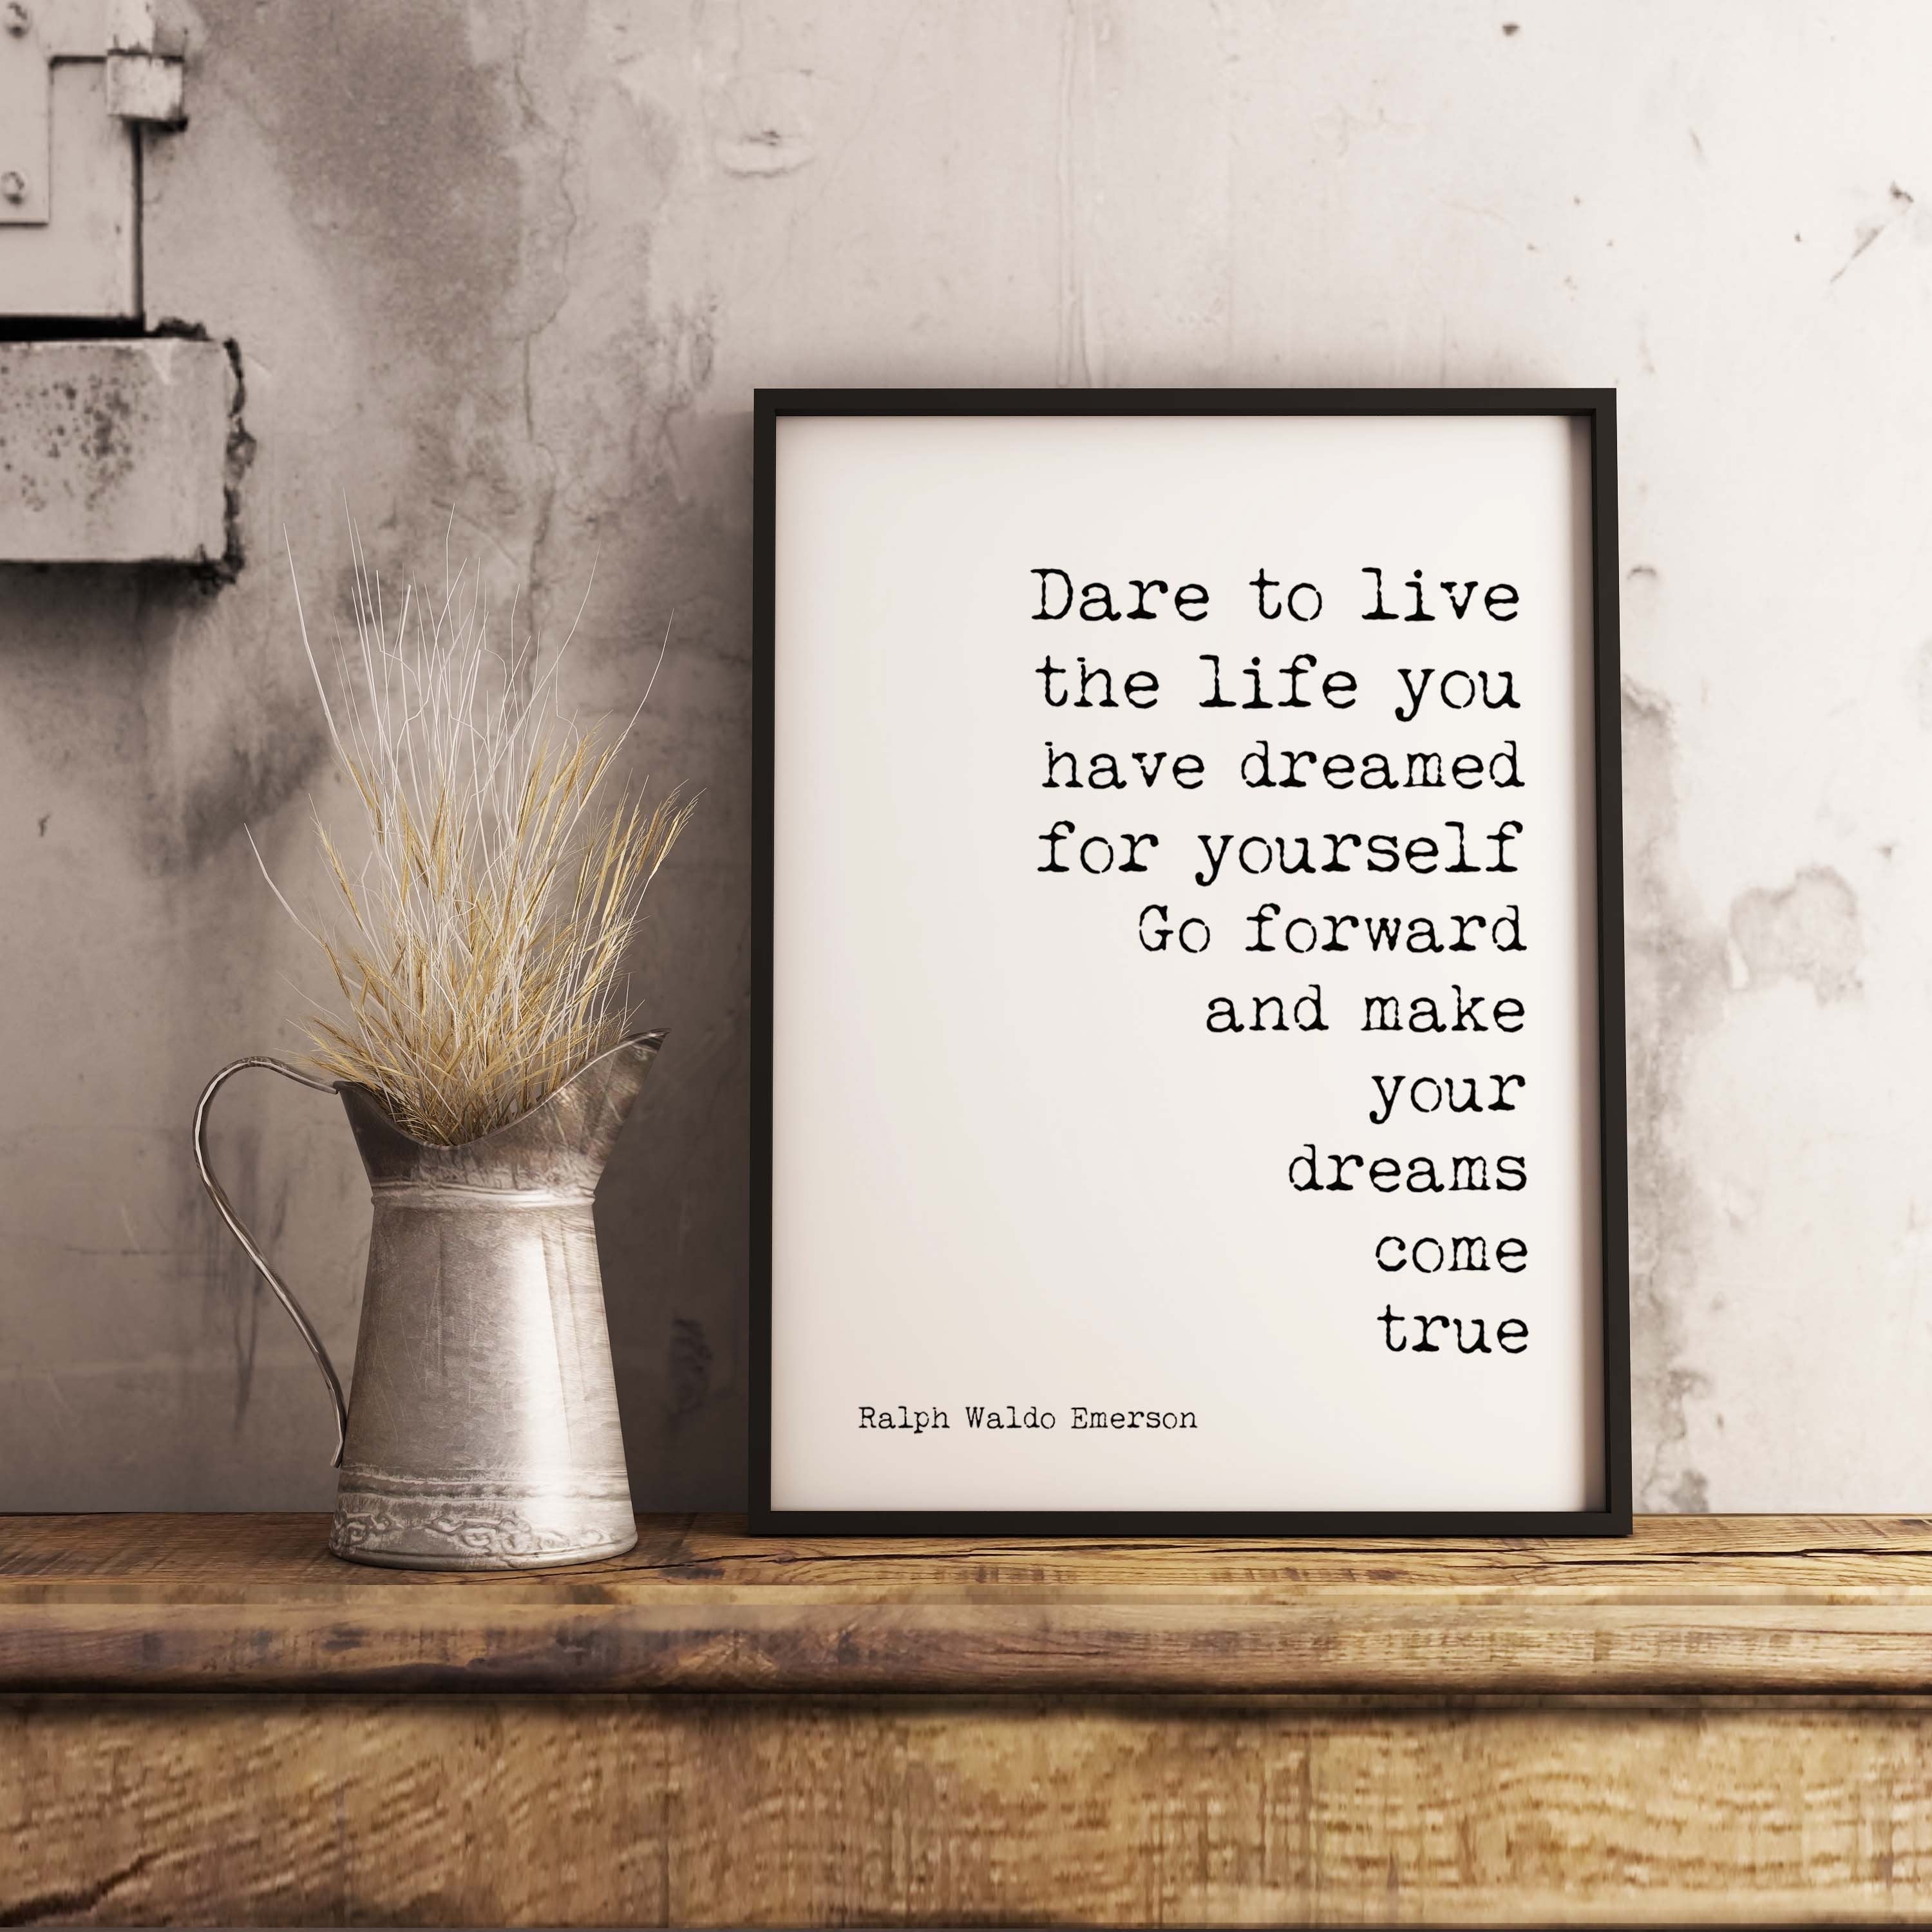 Framed Ralph Waldo Emerson Print Dare to Live the Life You Have Dreamed - BookQuoteDecor